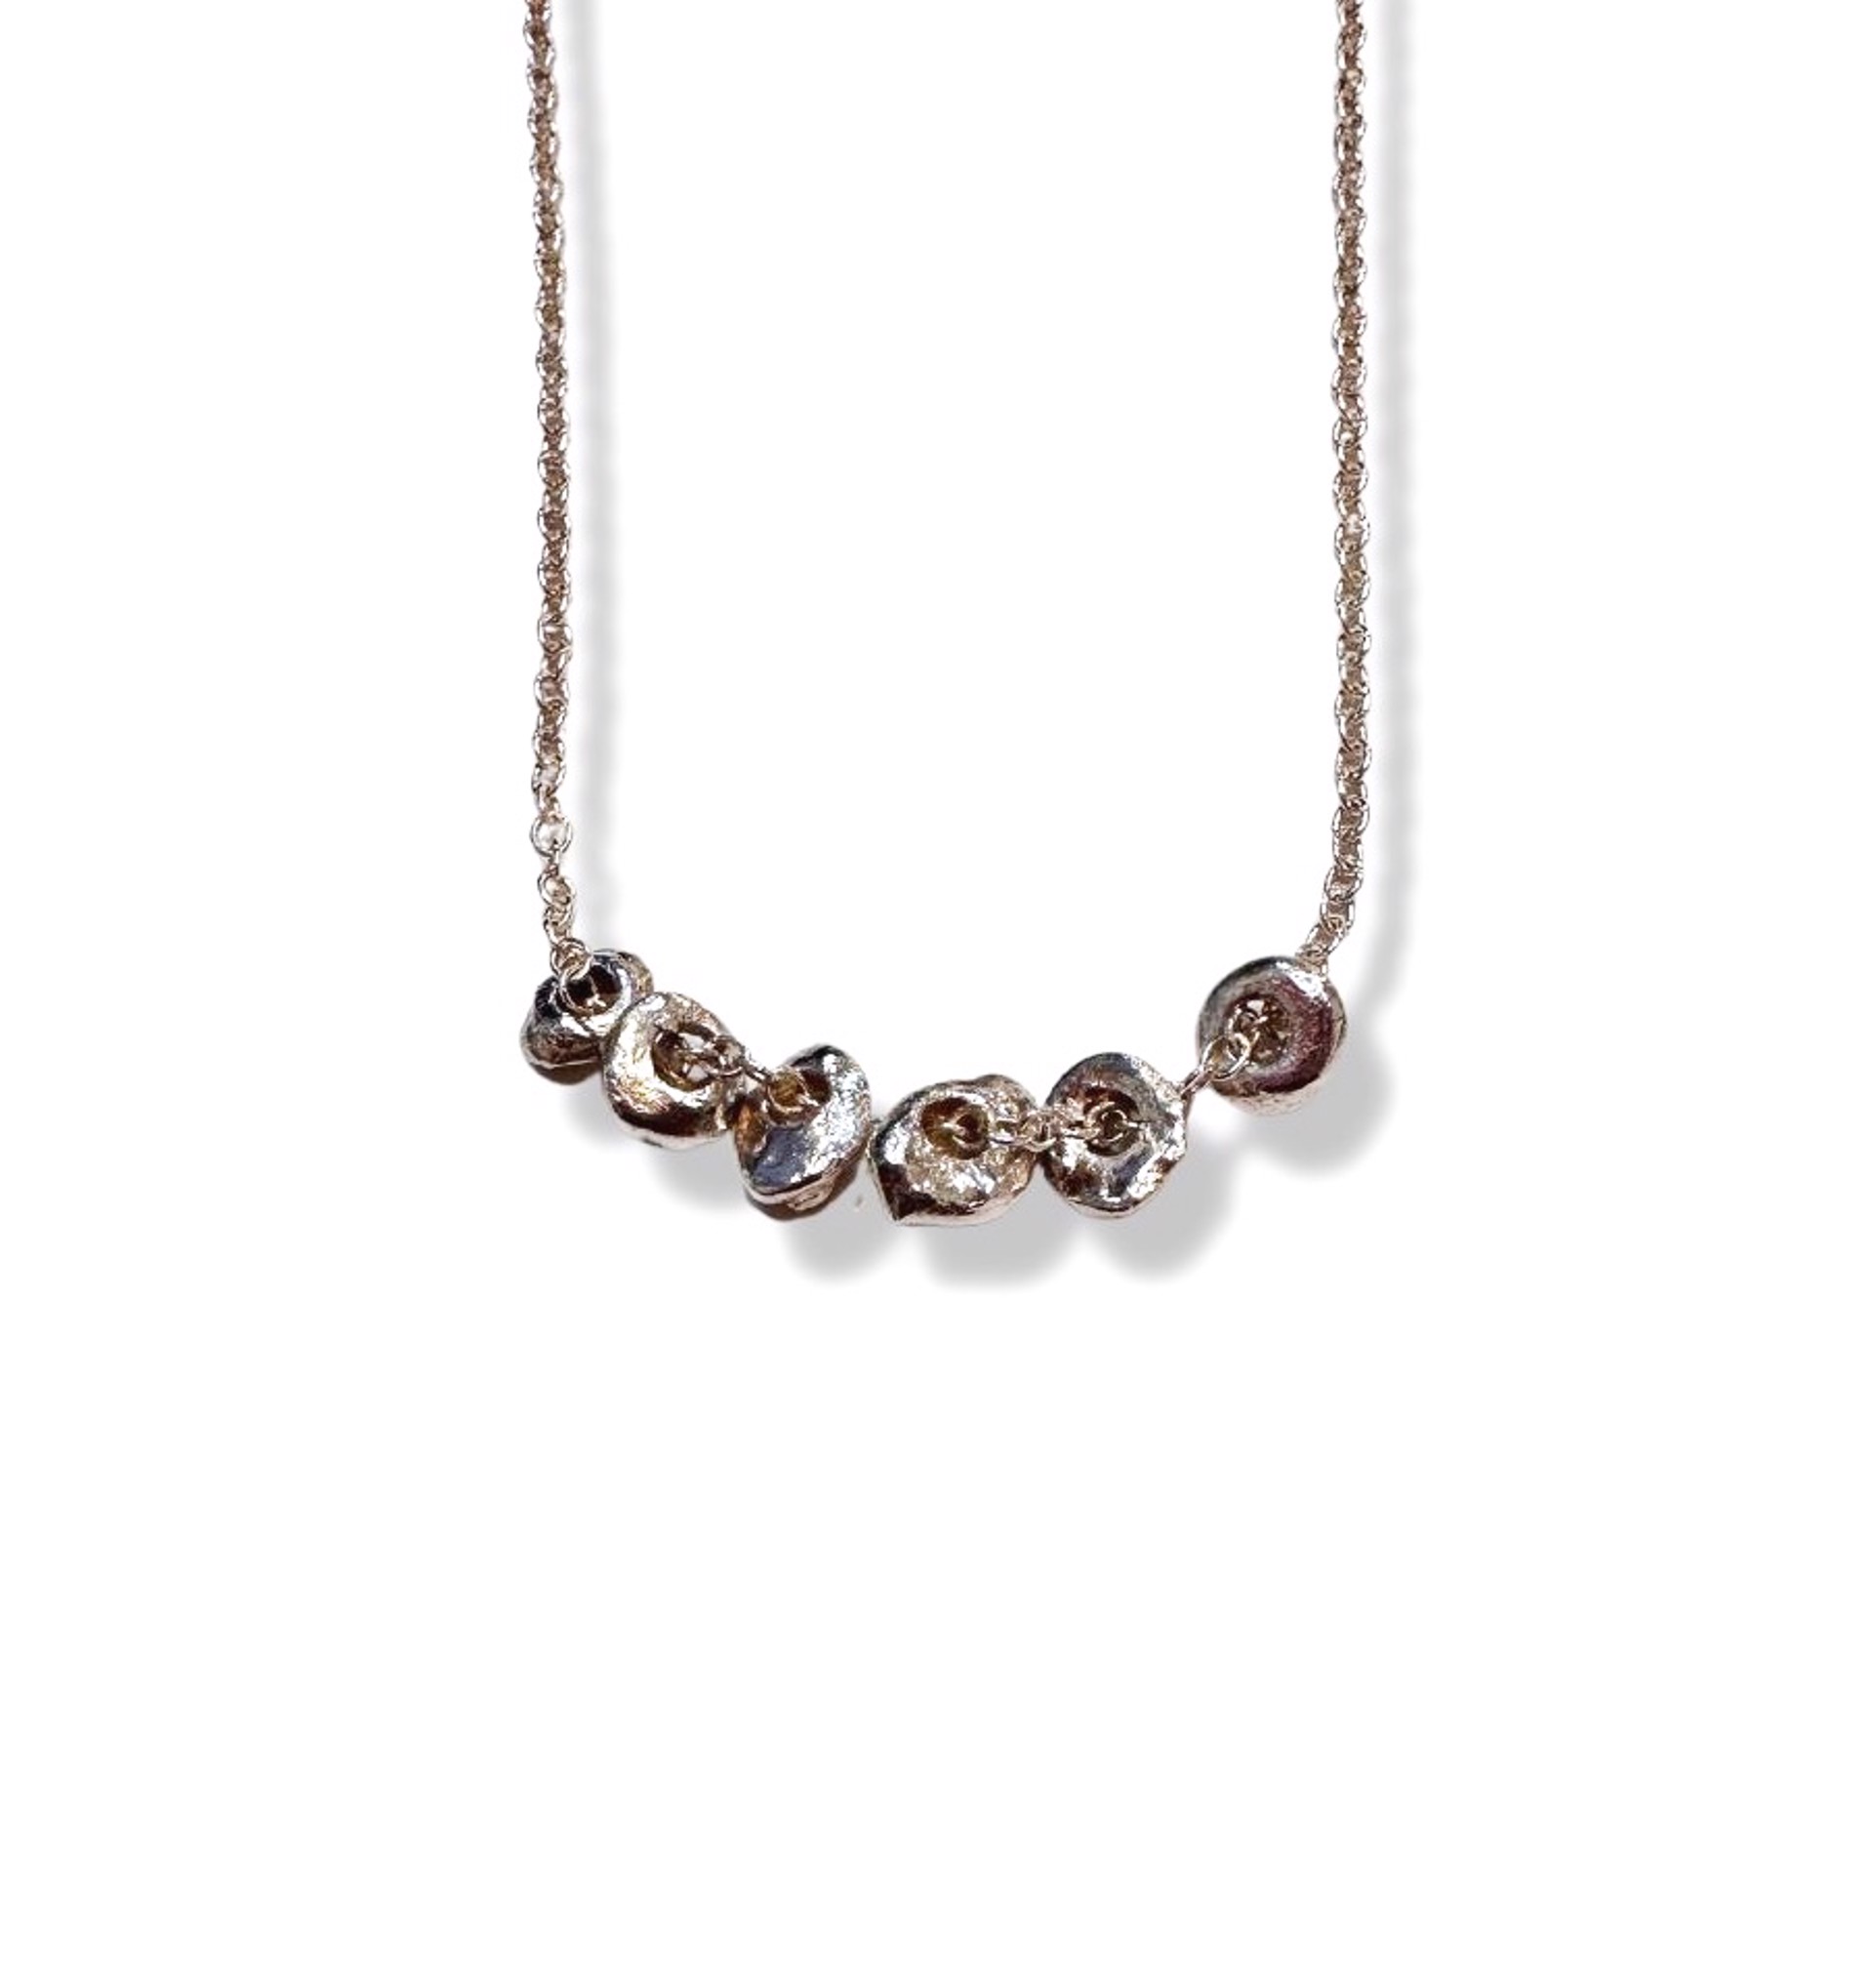 Necklace - Sterling Silver Chain with Pure Organic Silver Pebbles by Julia Balestracci